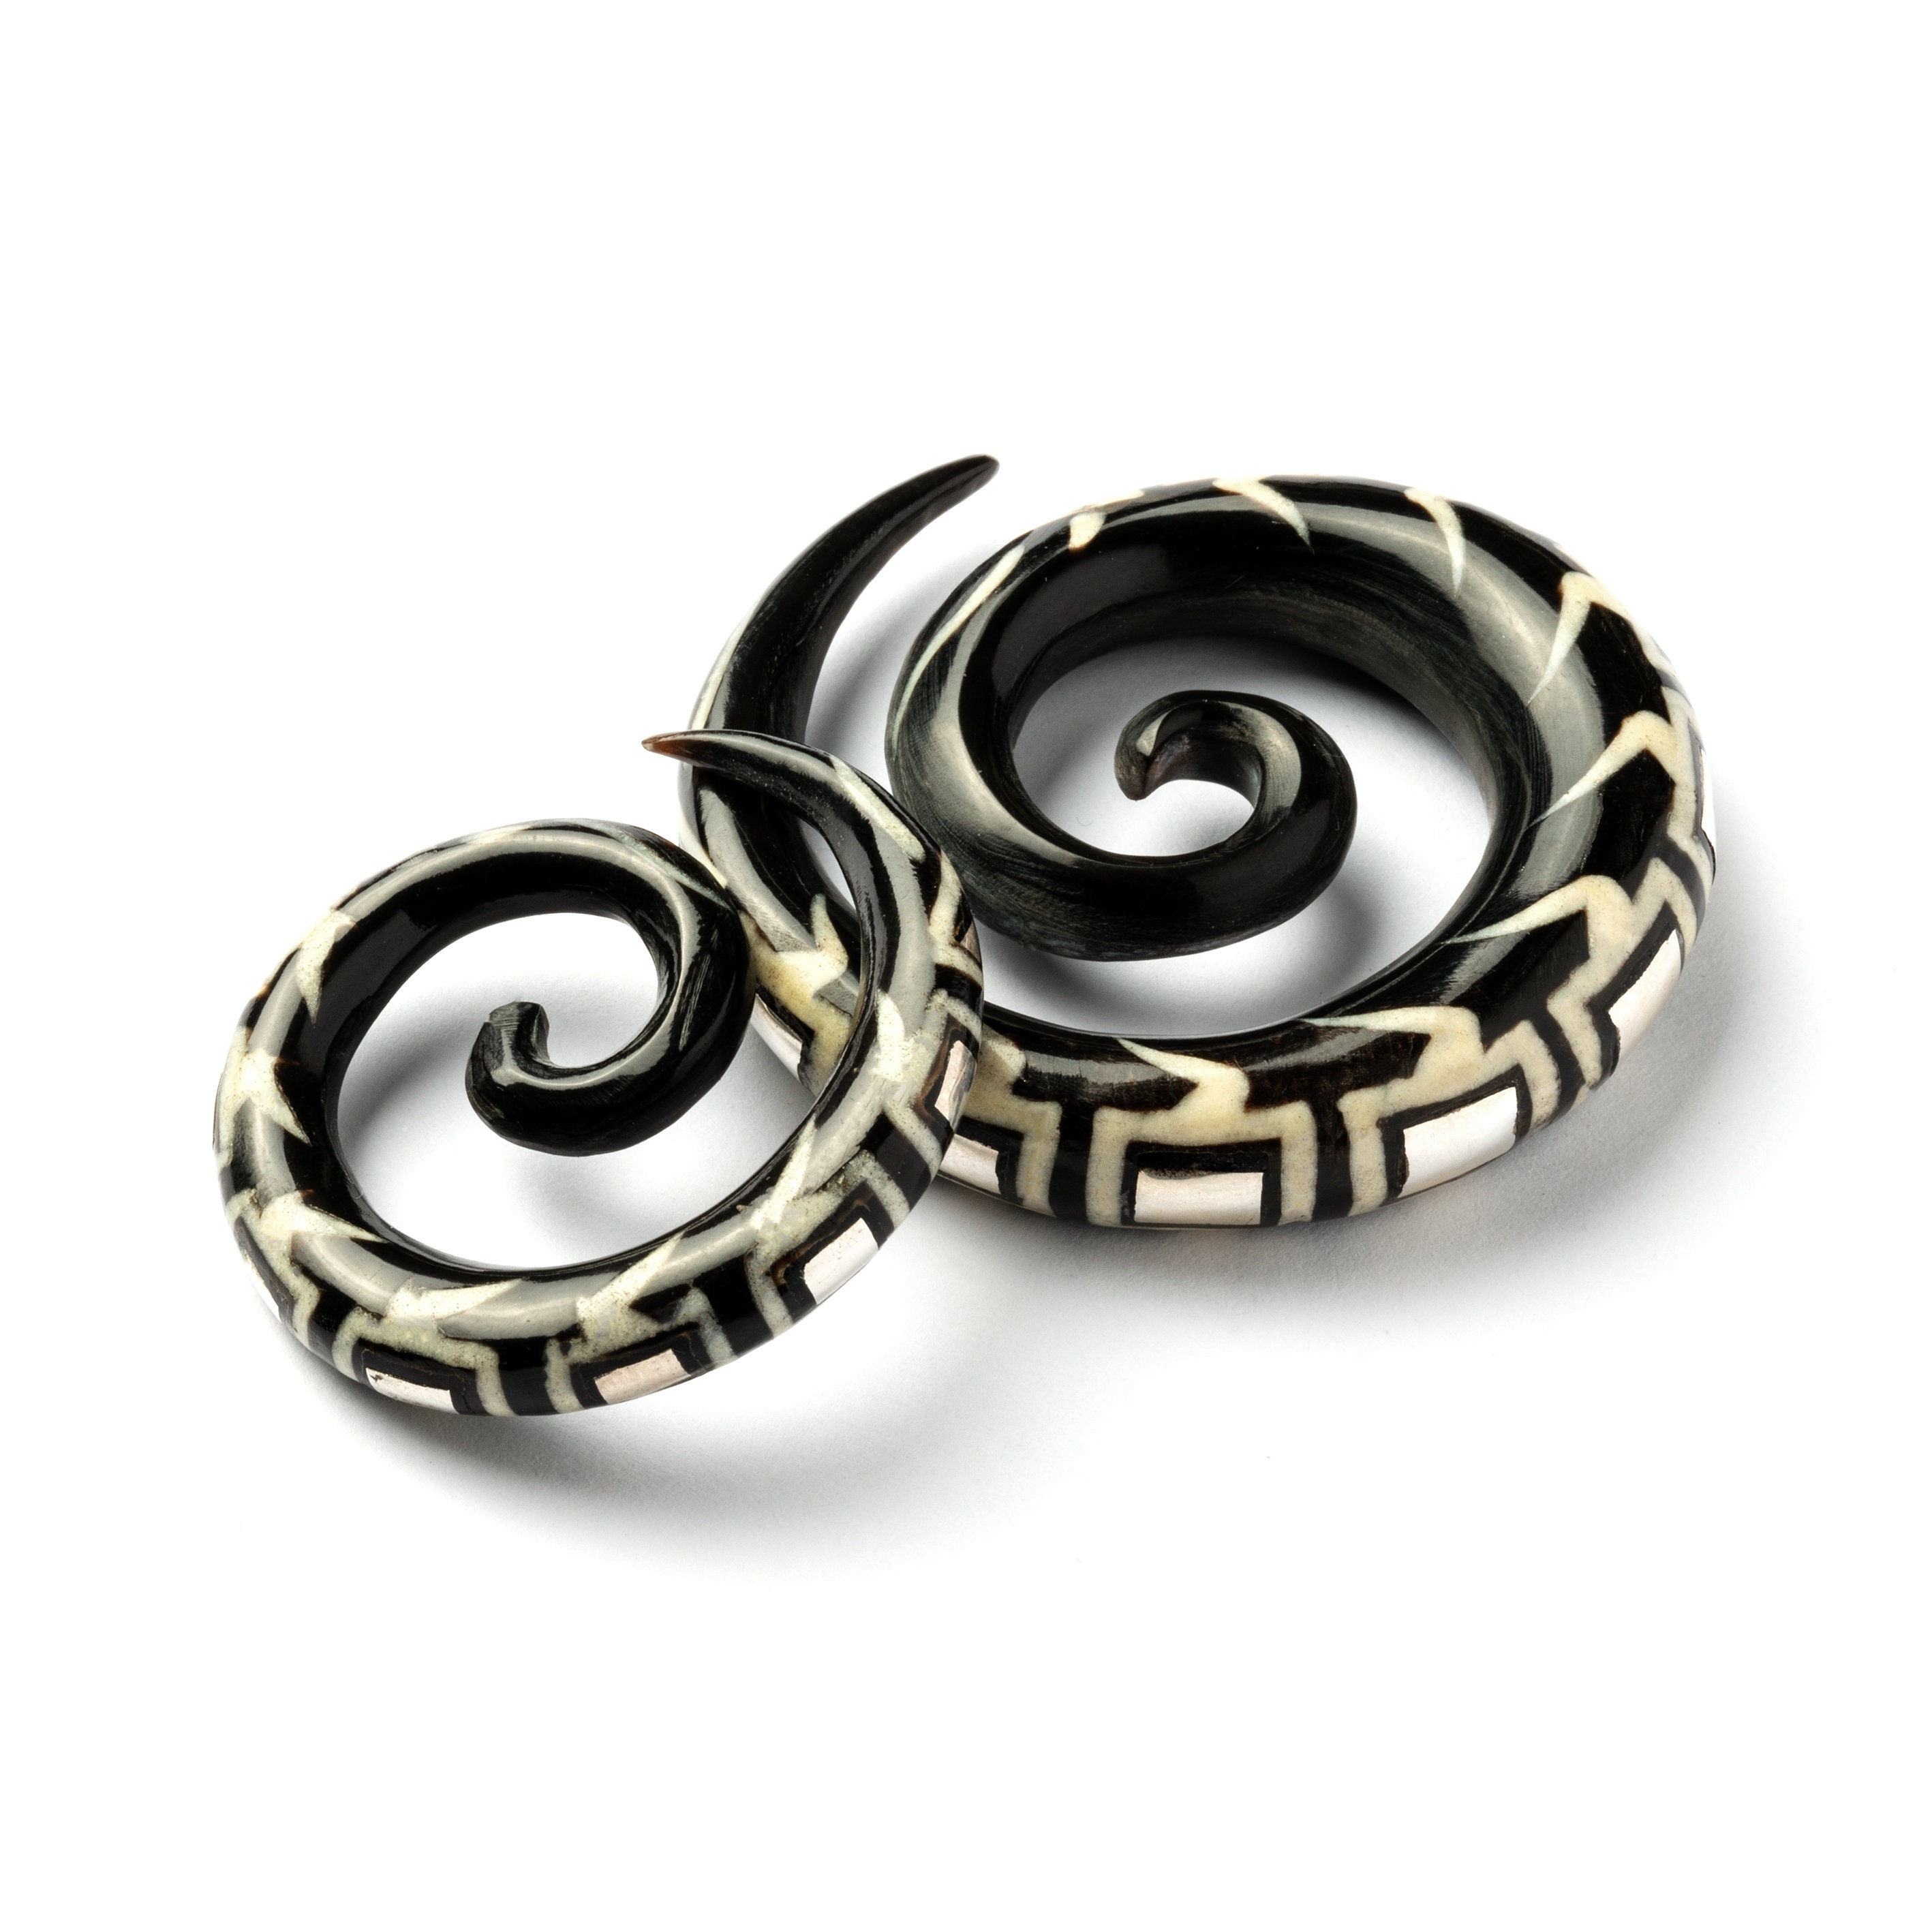 Black Spiral Gauges With Silver Inlay, Taper Gauge Earrings for